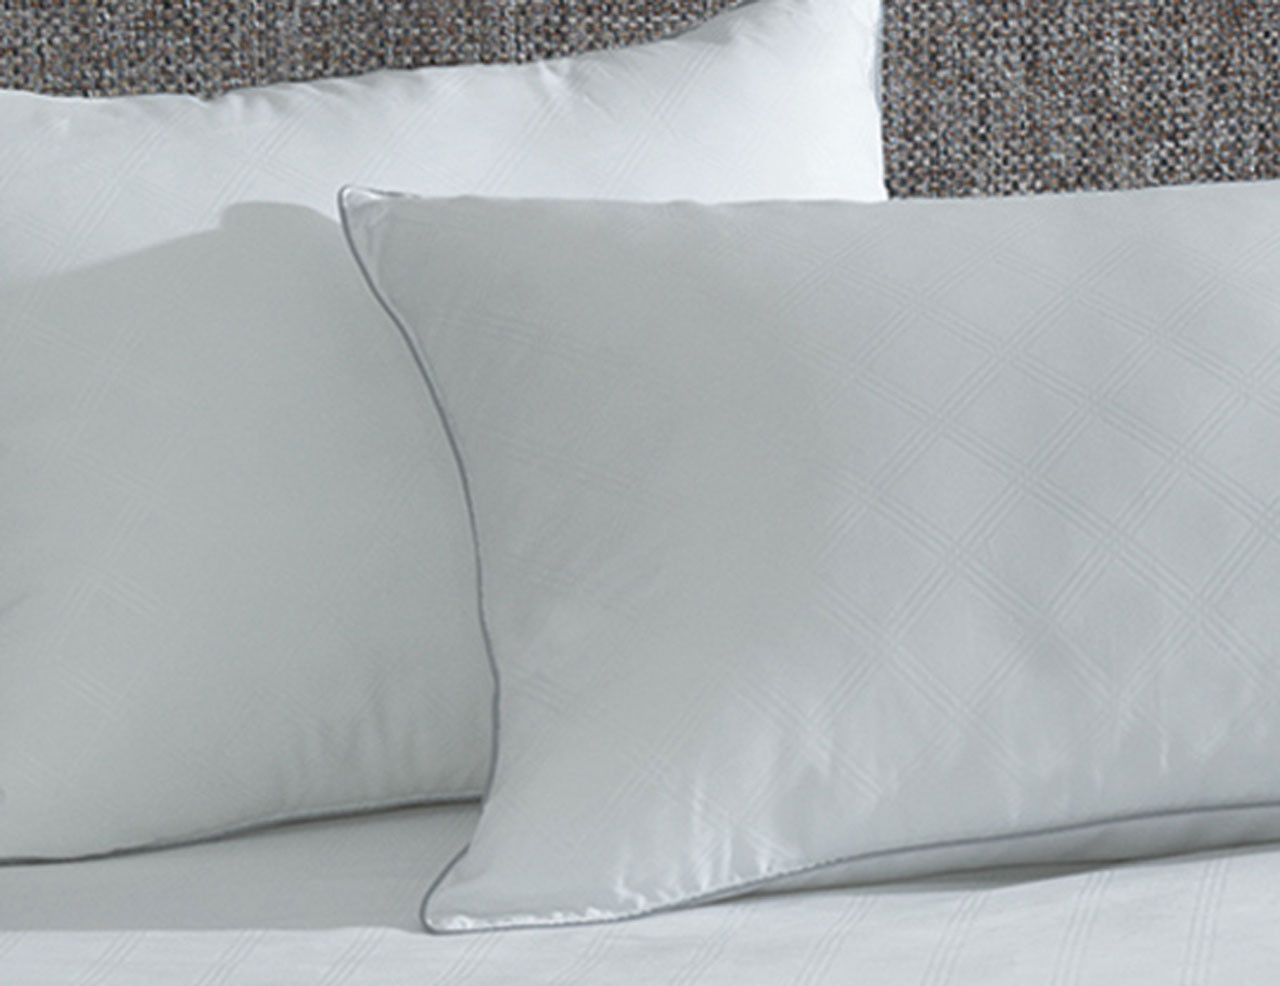 Do these AllerEase Ultimate Professional Pillows come in standard sizes?